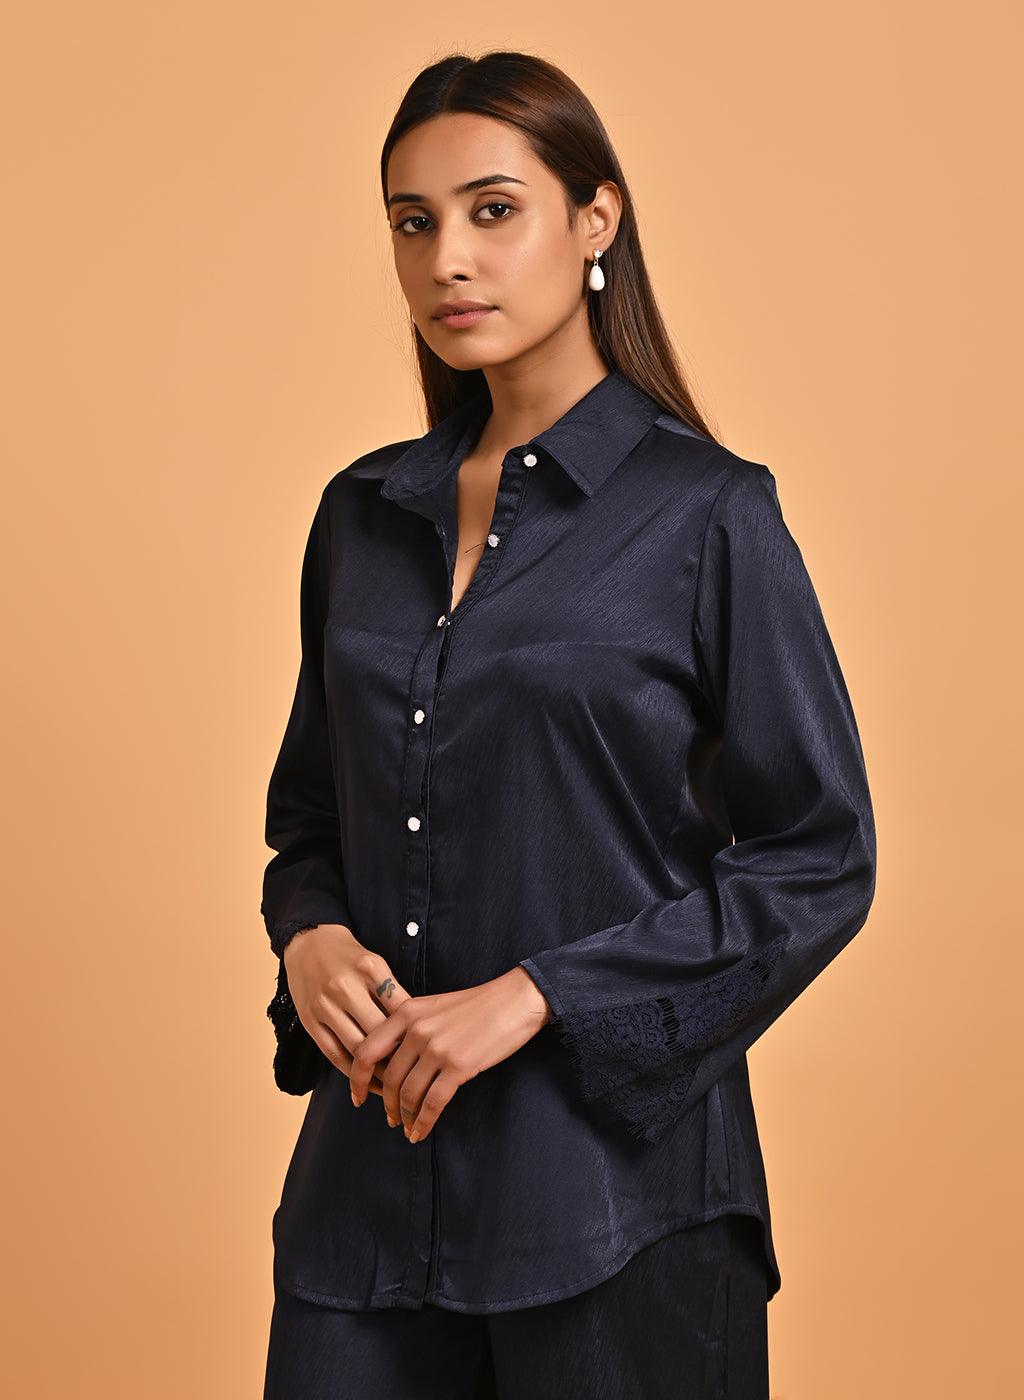 Midnight Blue Co-ord Set with Net Inserts at Sleeves - Lakshita